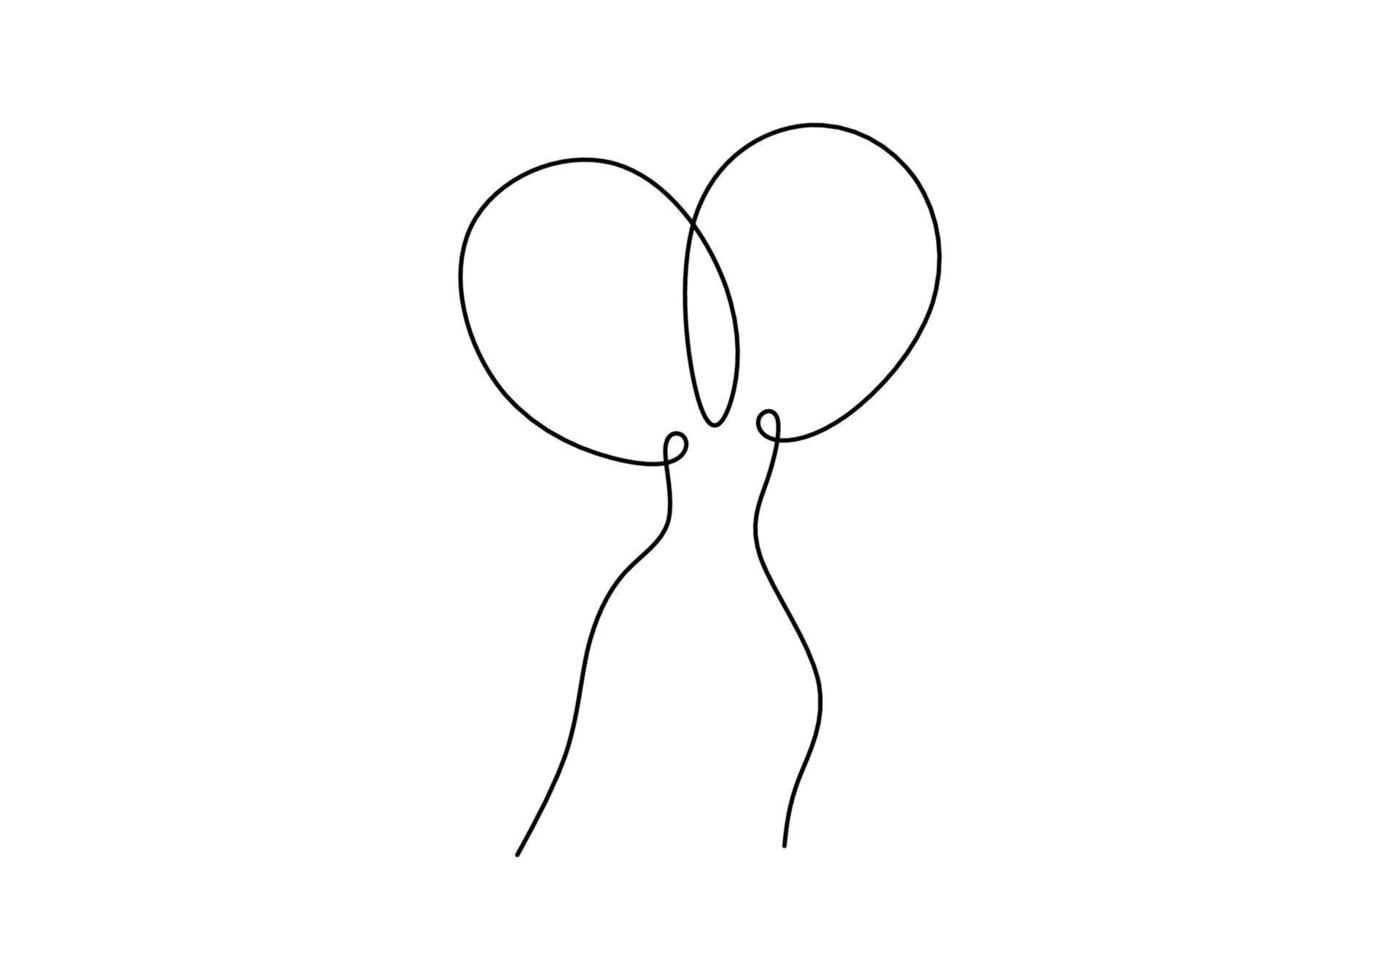 Continuous one single line of two flying balloons on white background. vector